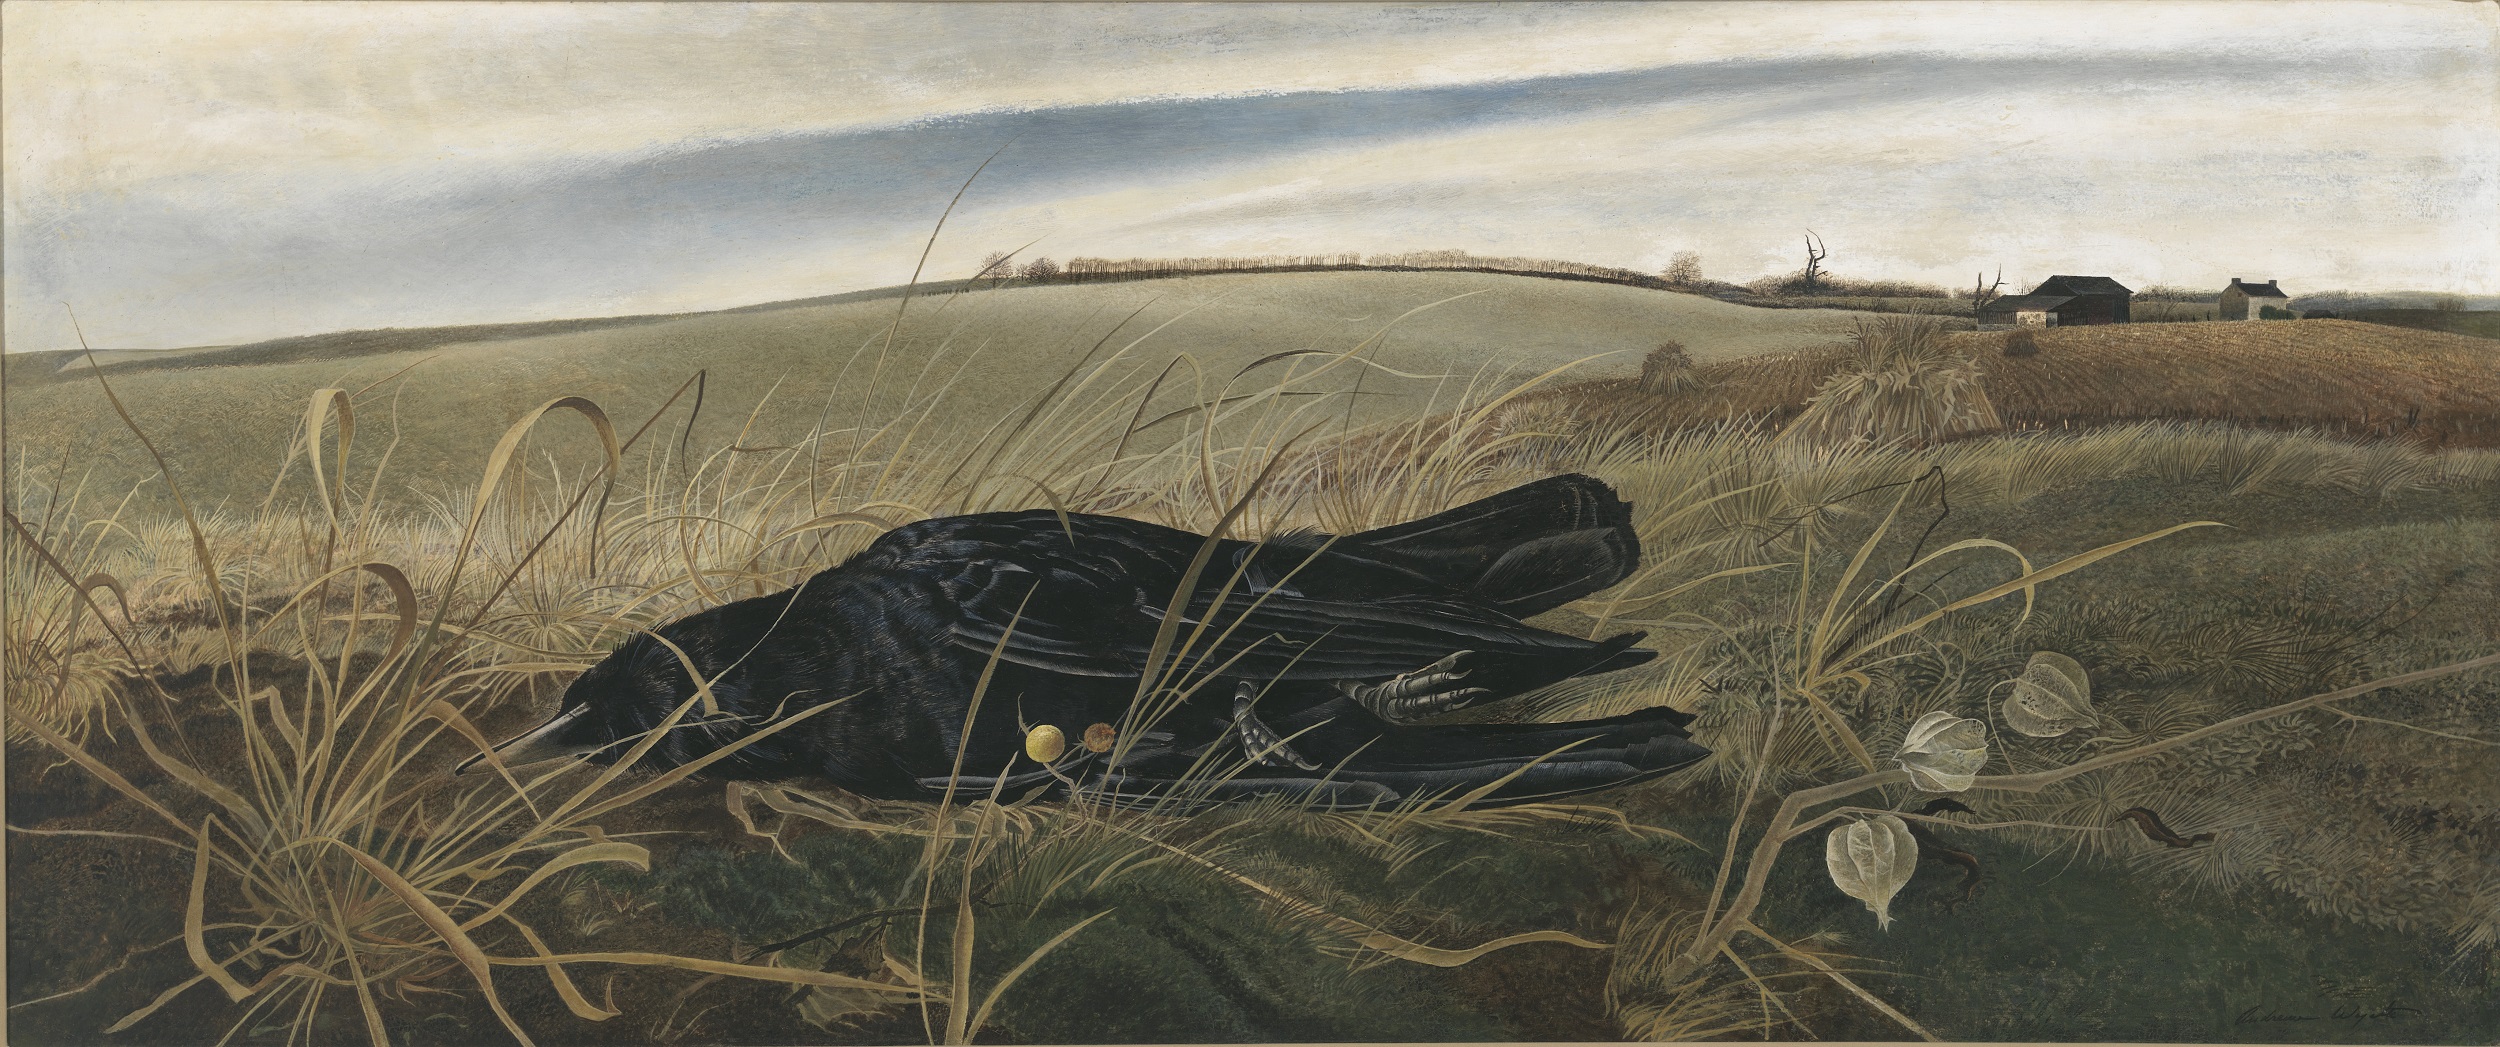 Painting of a landscape with a dead crow surrounded by dead grass